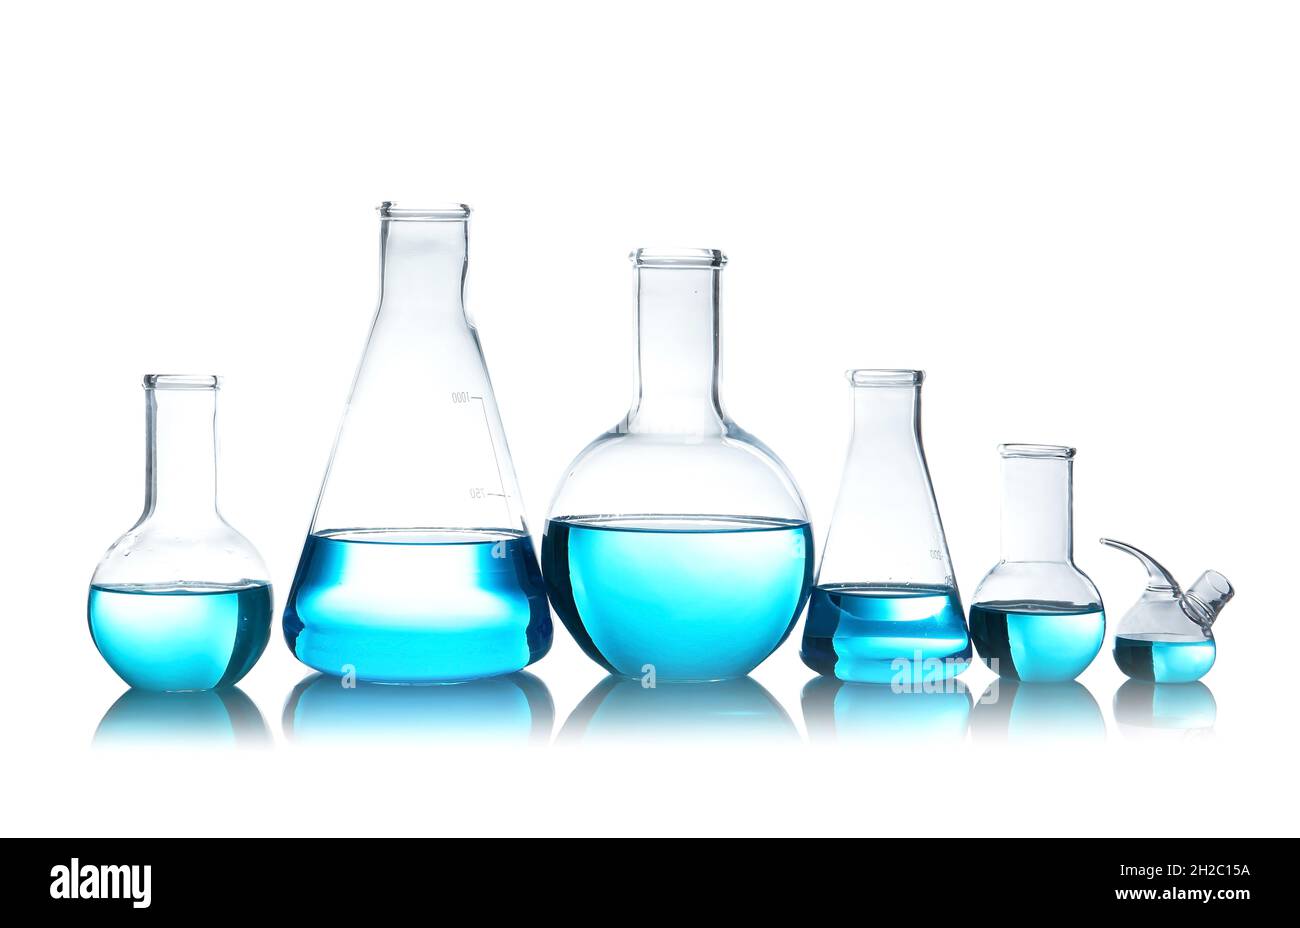 Laboratory glassware for chemical analysis with blue liquid on table against white background Stock Photo